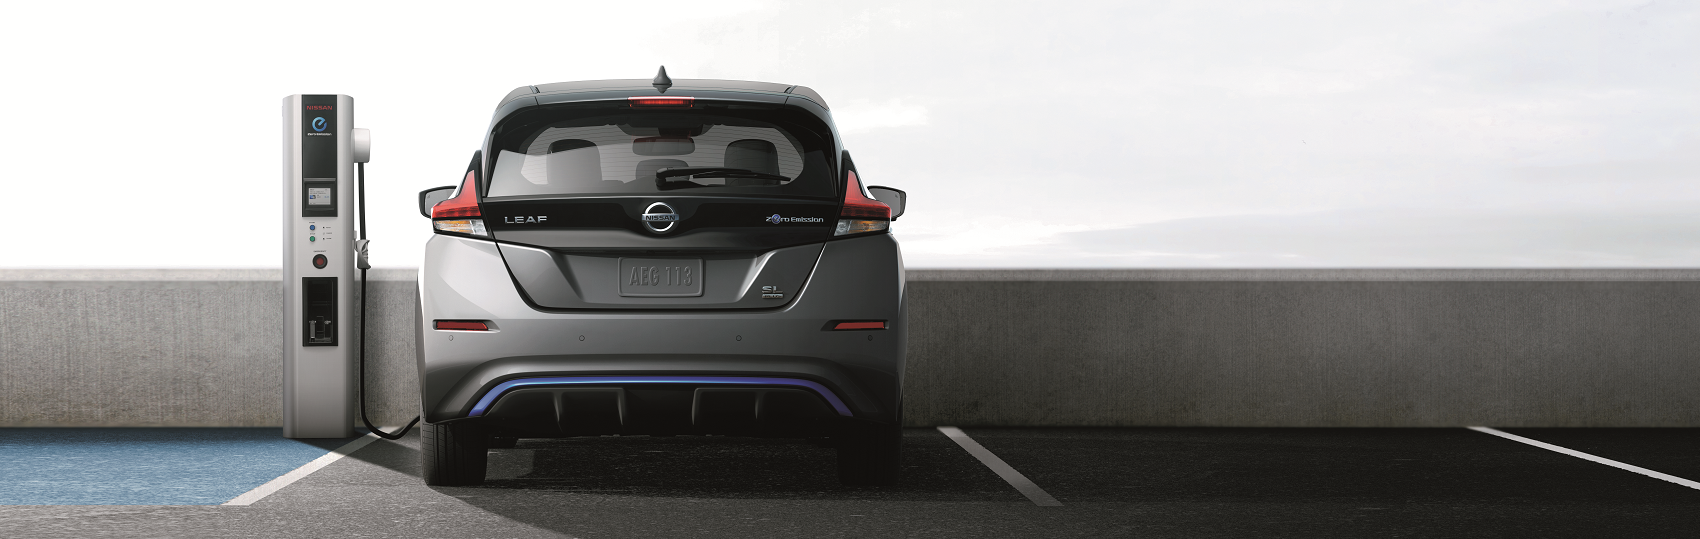 2021 Nissan LEAF Review Avon IN